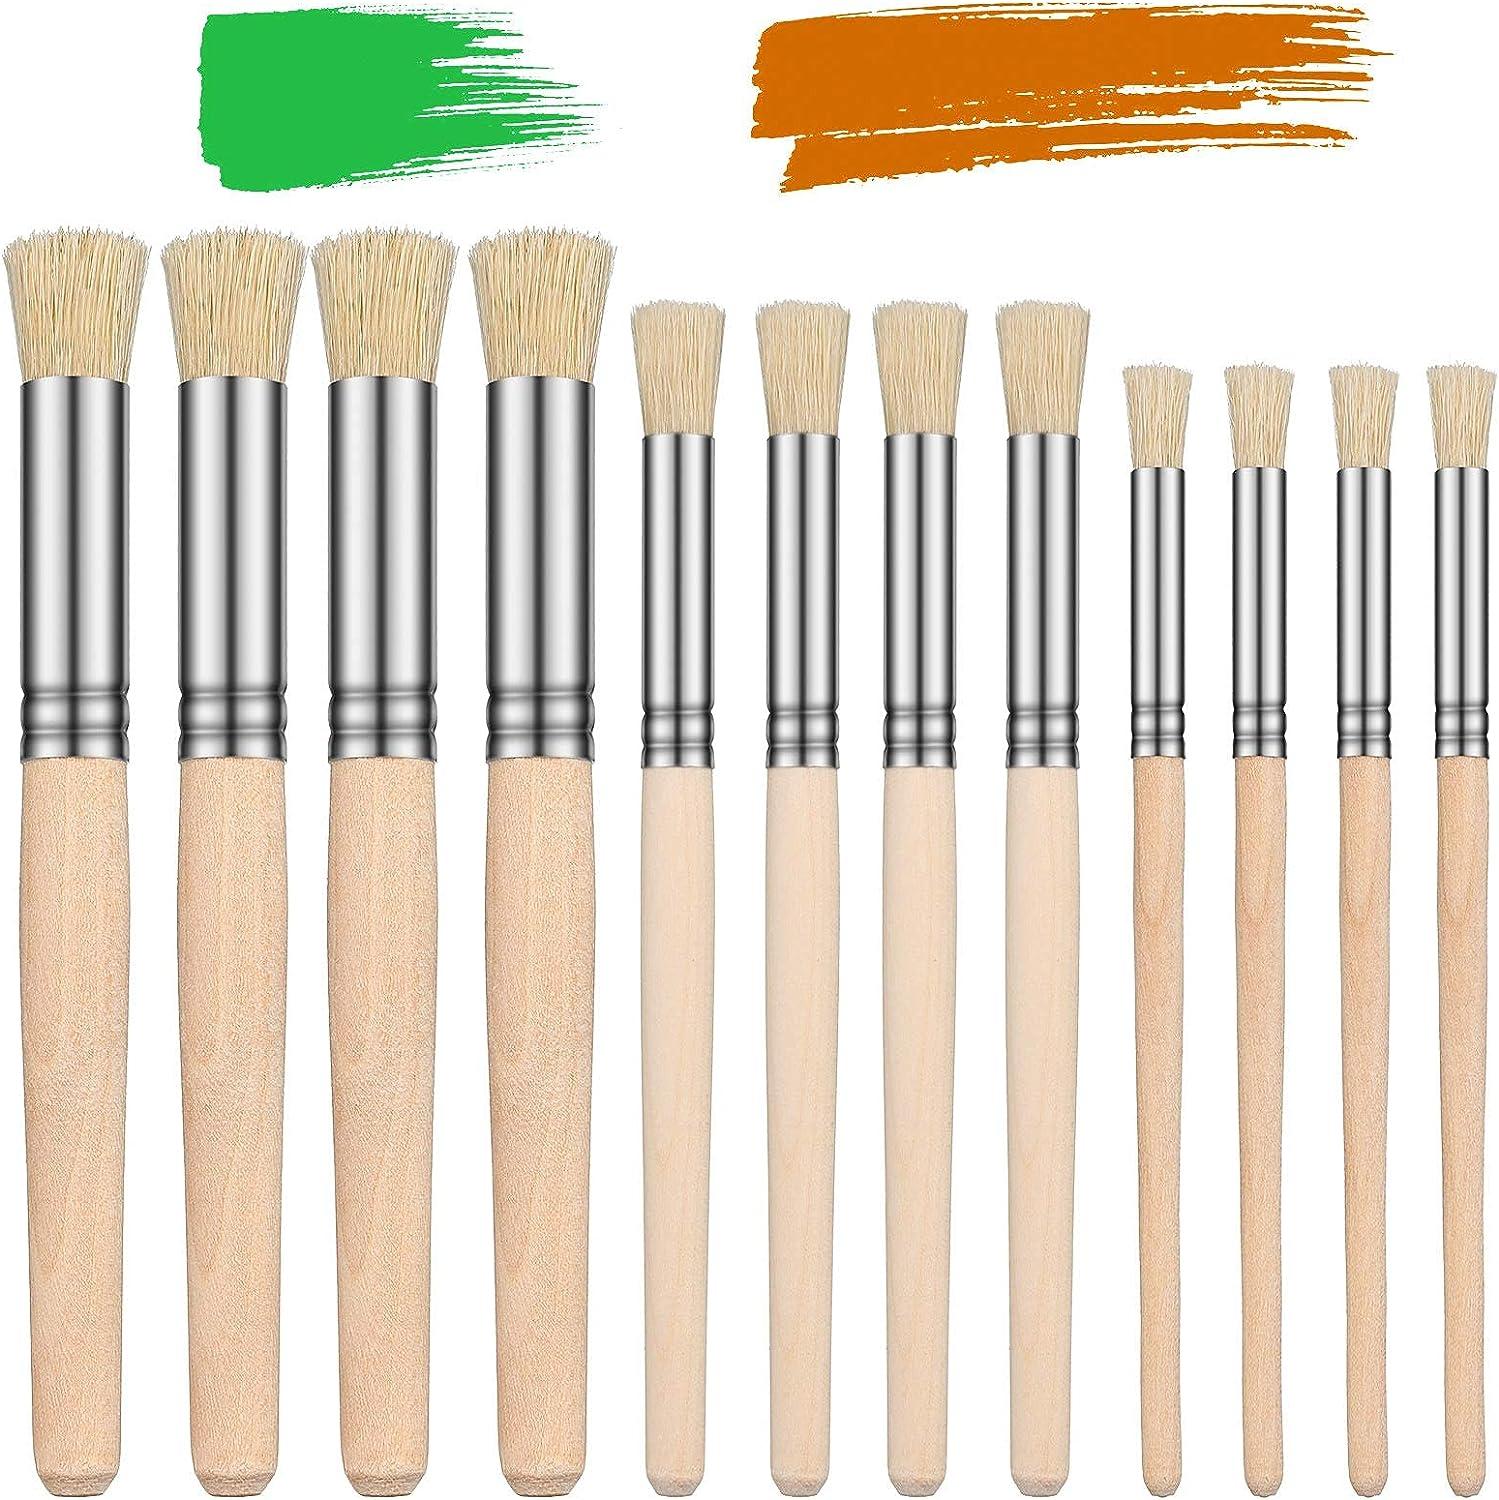 3 Pcs Wooden Stencil Brushes for Acrylic Paint Natural Wood Bristle  Template Brush for Oil Painting Watercolor Painting Stencil Project DIY Art  Craft